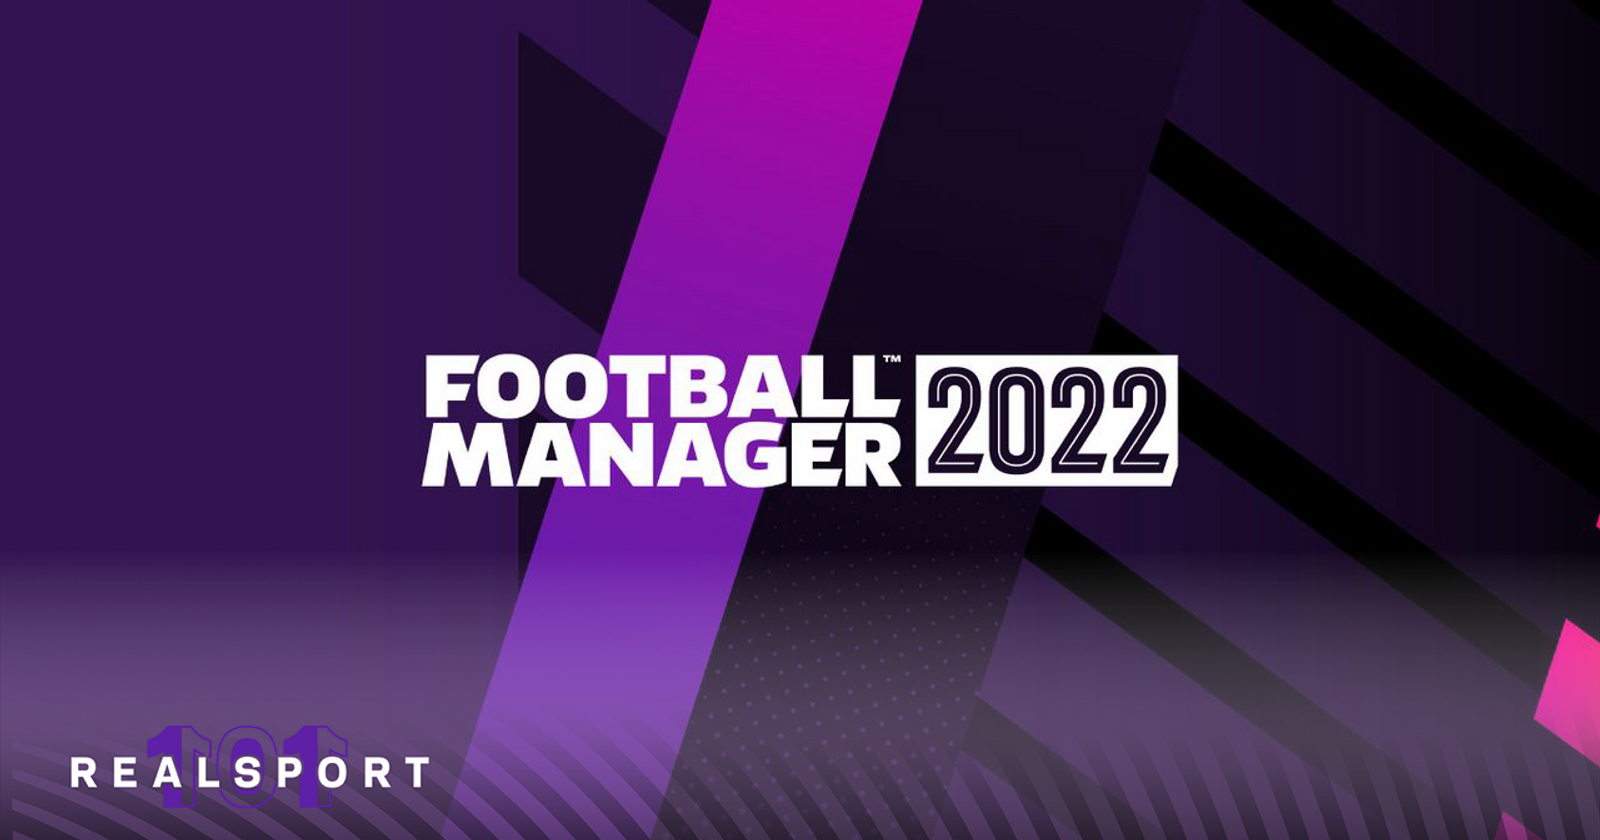 Football Manager 2022 Sales Soar: Almost $5 Million in First Month on Steam